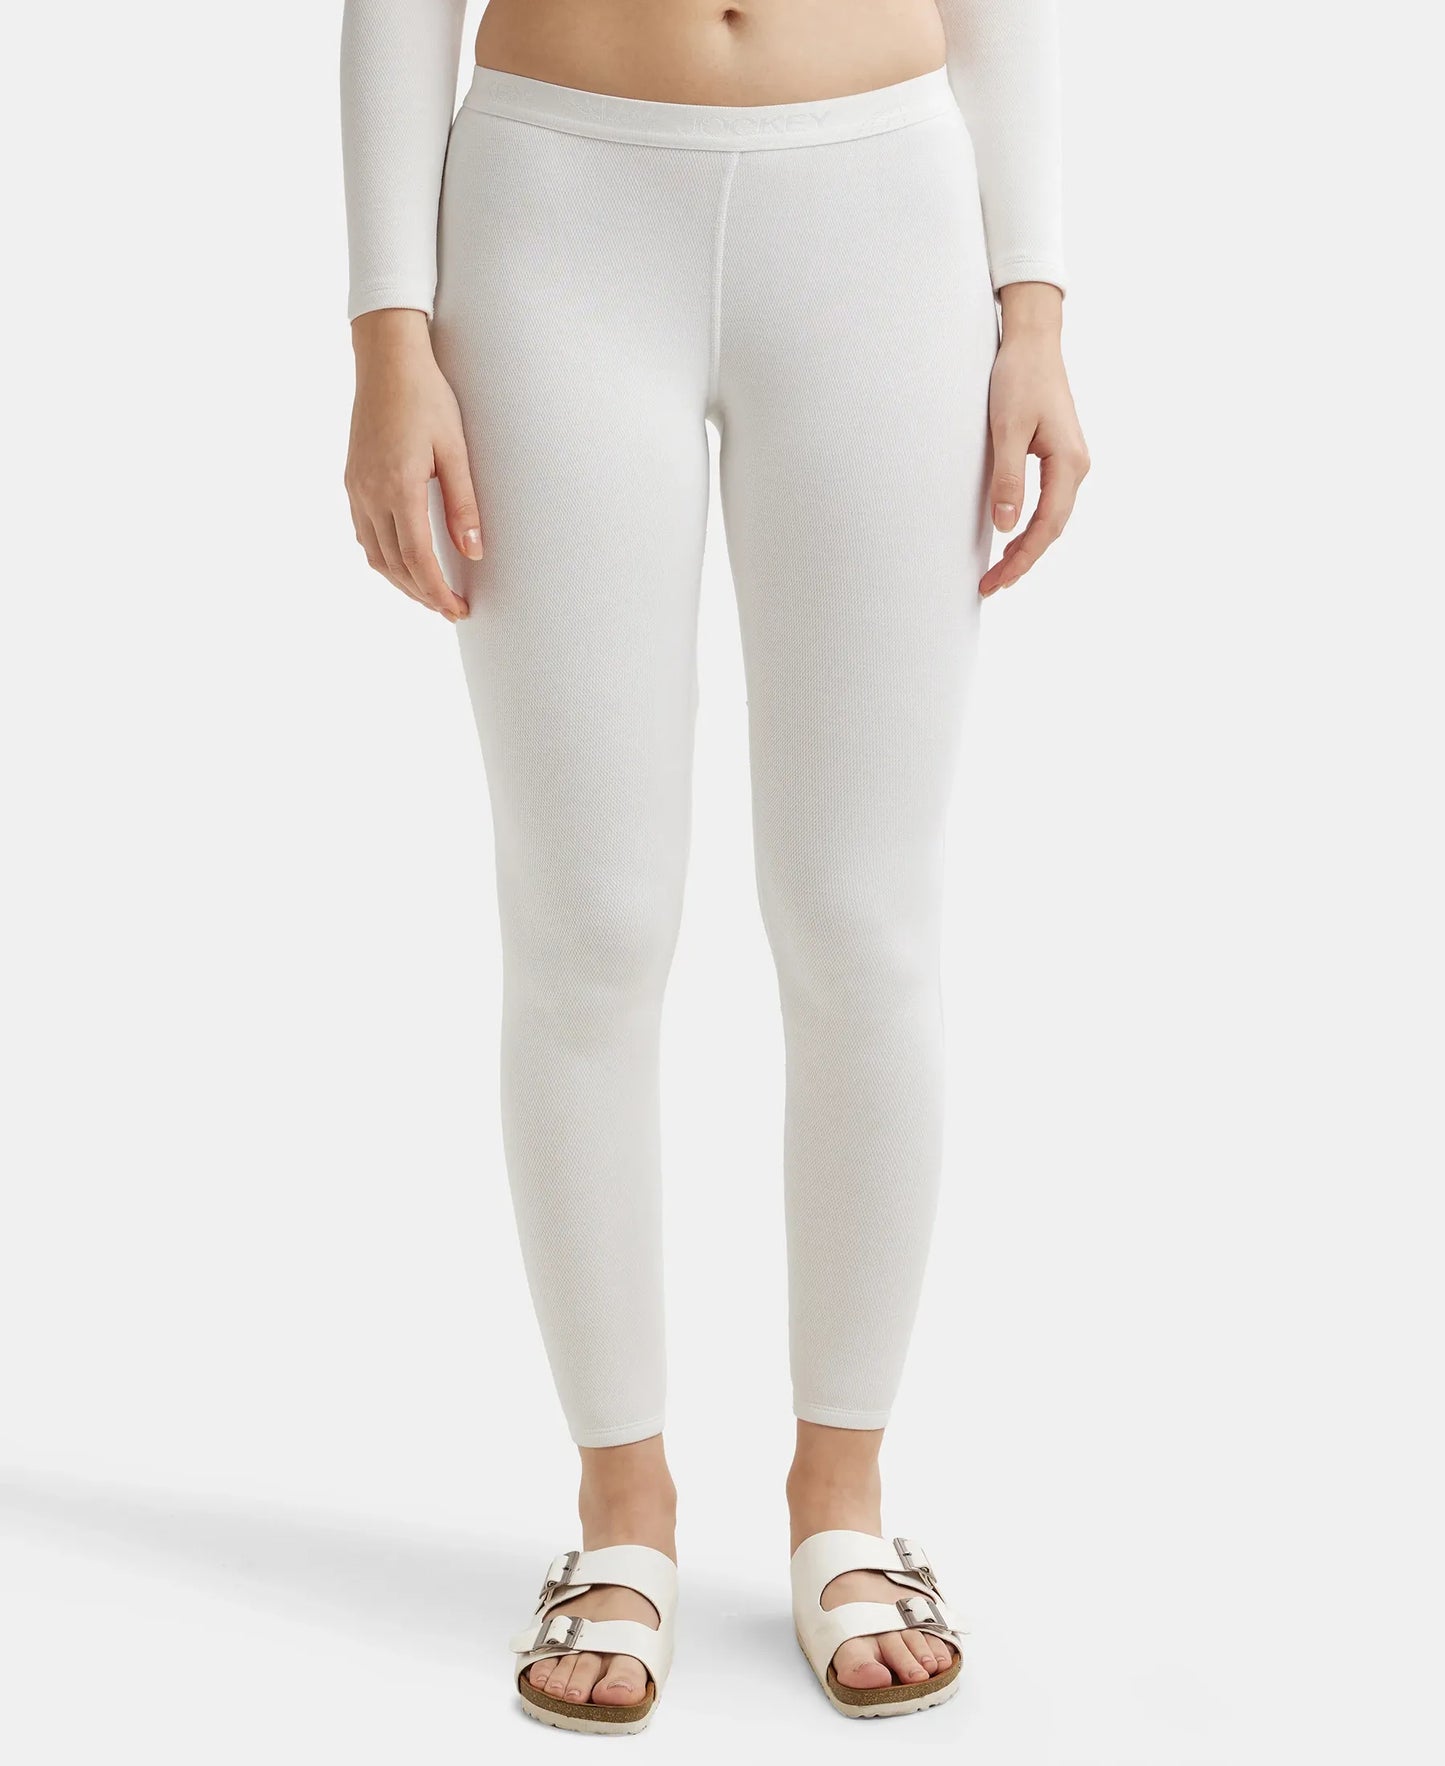 Soft Touch Microfiber Elastane Stretch Fleece Fabric Thermal Leggings with StayWarm Technology - Light Bright White-1